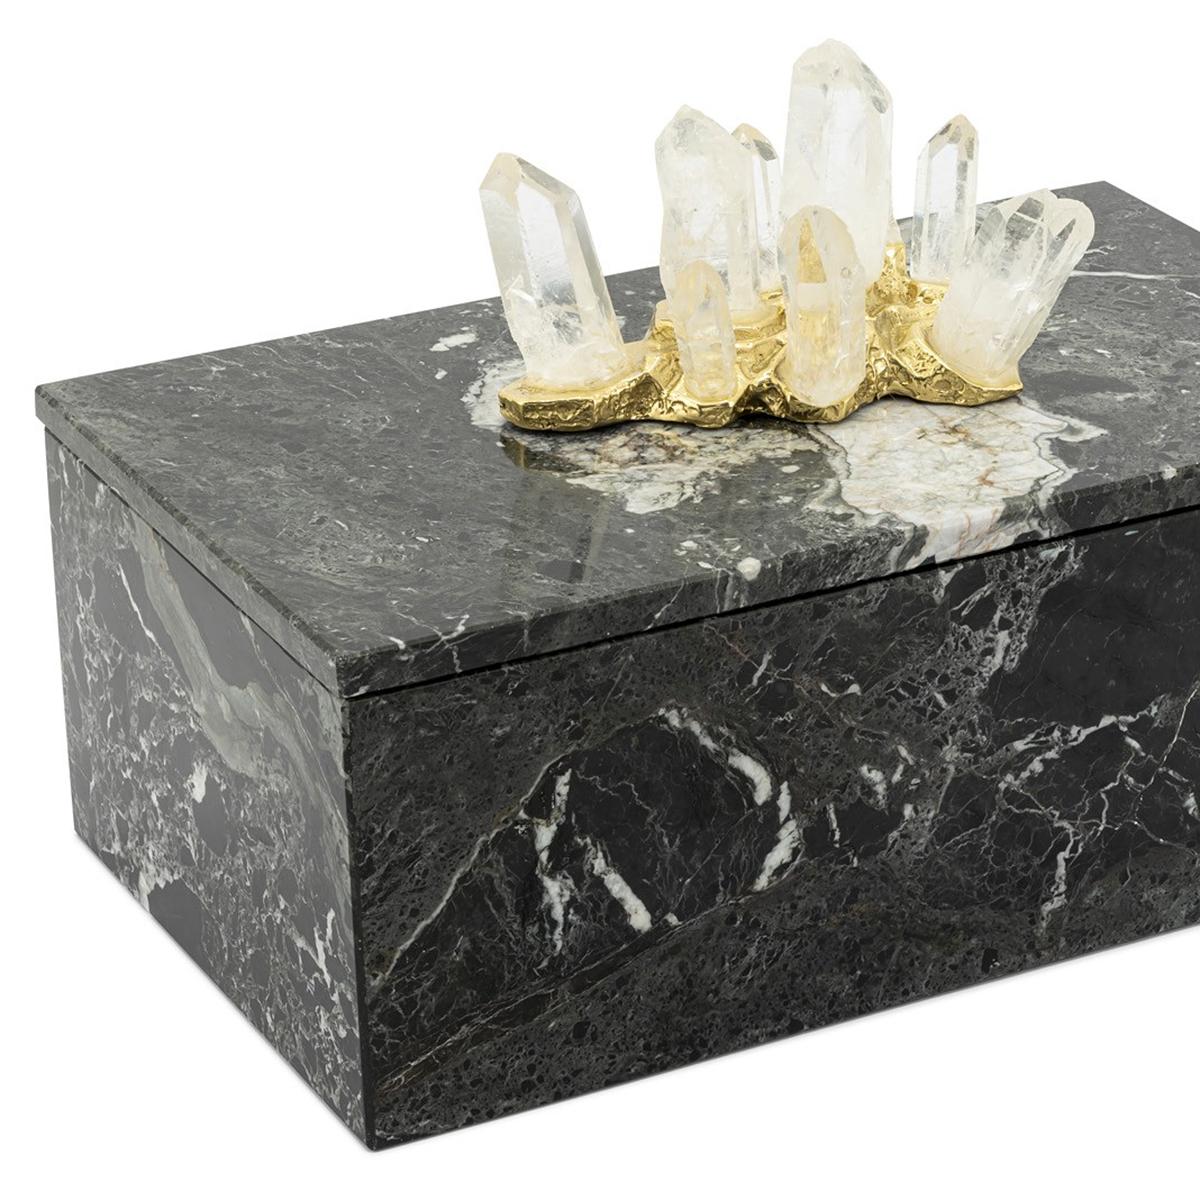 Box quartz and marble in black marble
with lid. With natural quartz on lid's top.